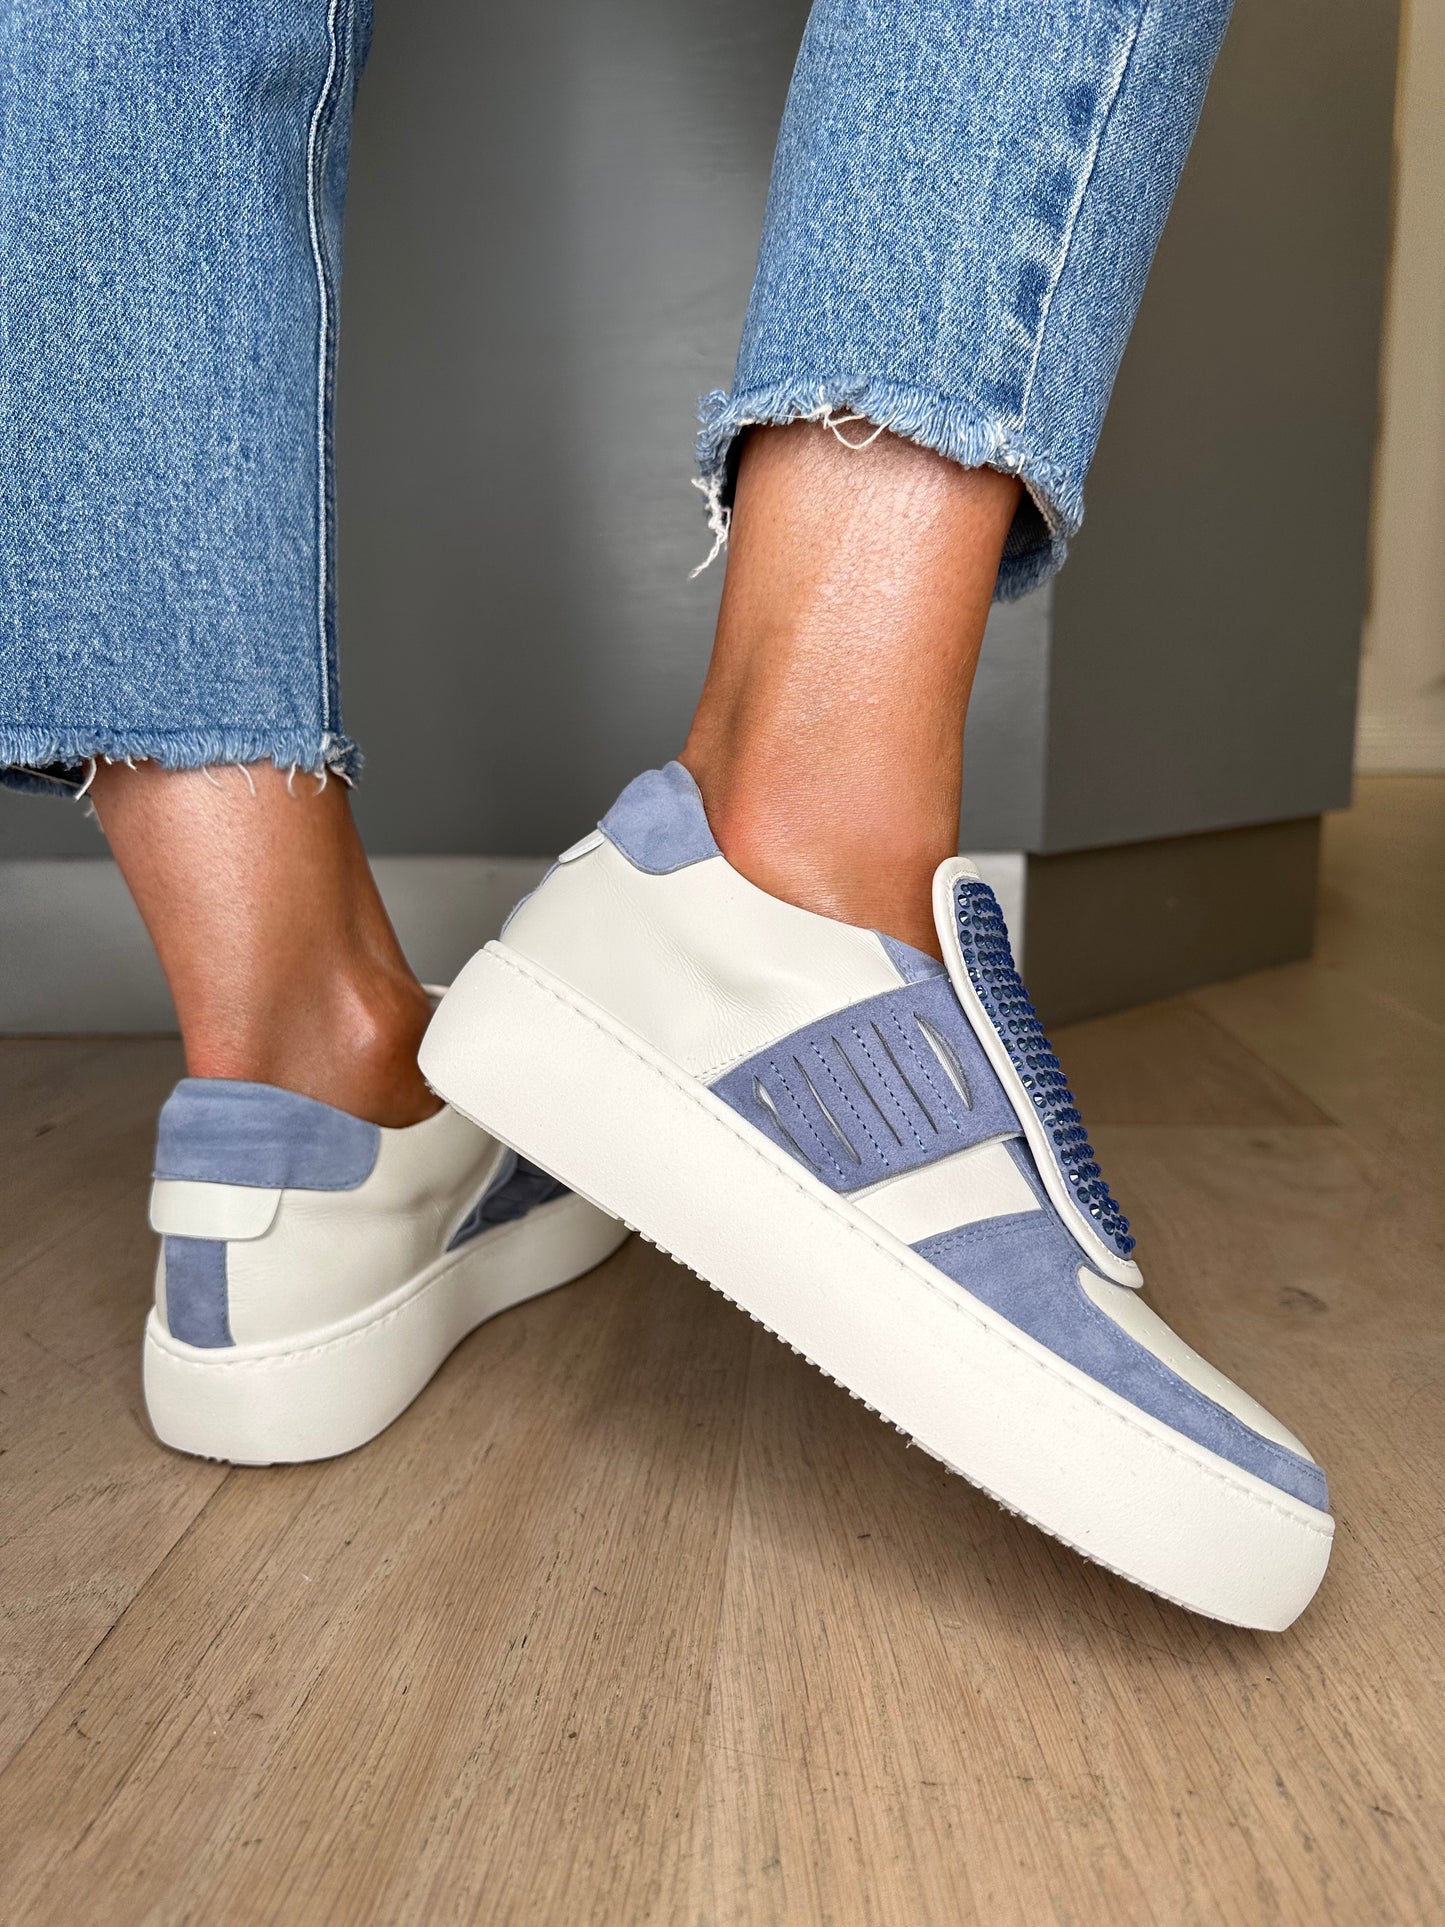 Oxitaly ( Fratelli Russo) 'Claire' White Leather/Denim Blue Flatform Studded Trainer